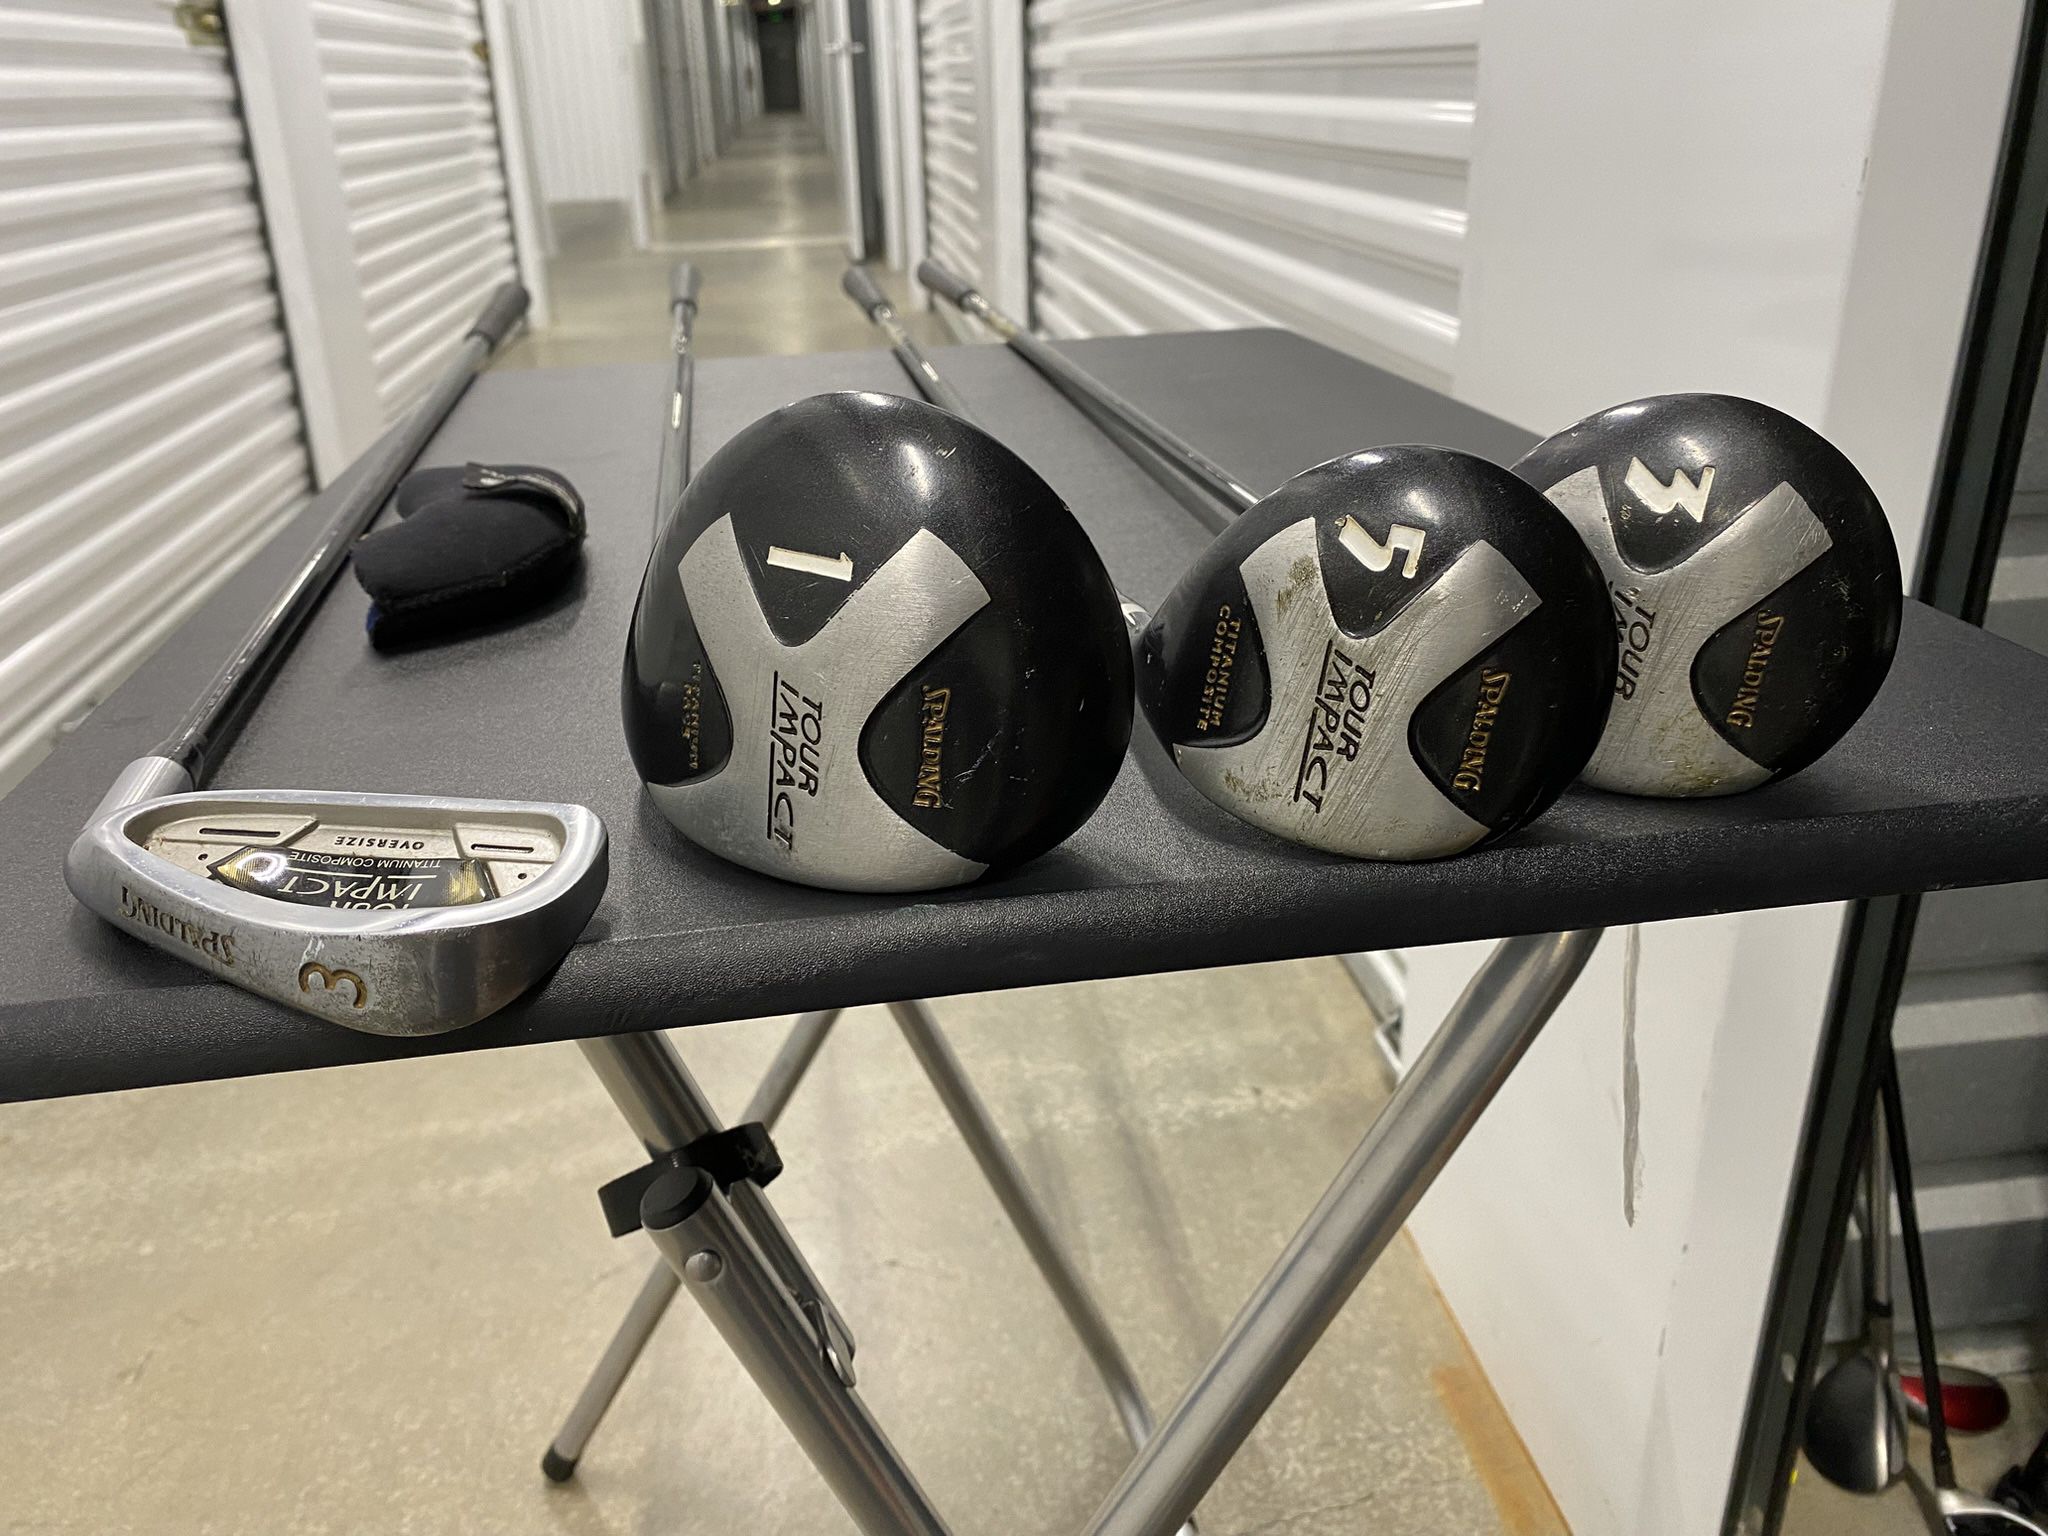 Spalding Tour Impact Drivers and Iron